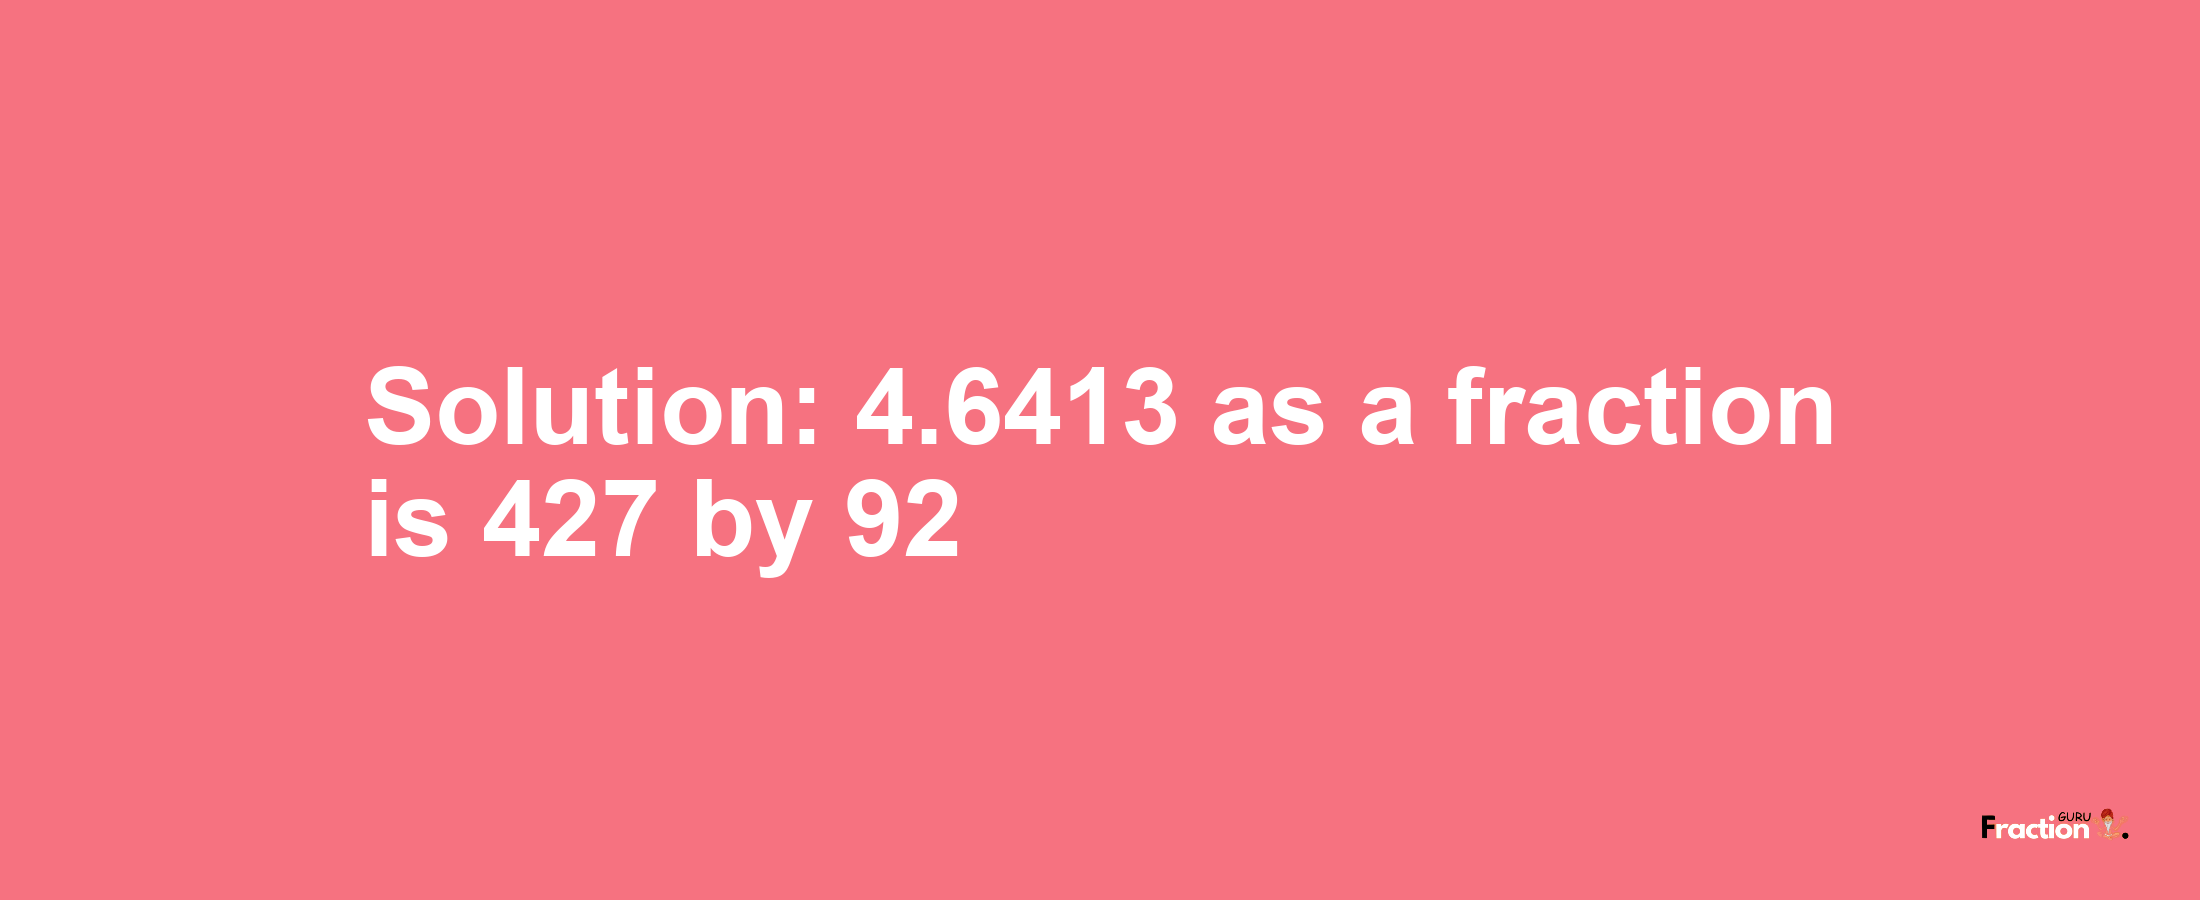 Solution:4.6413 as a fraction is 427/92